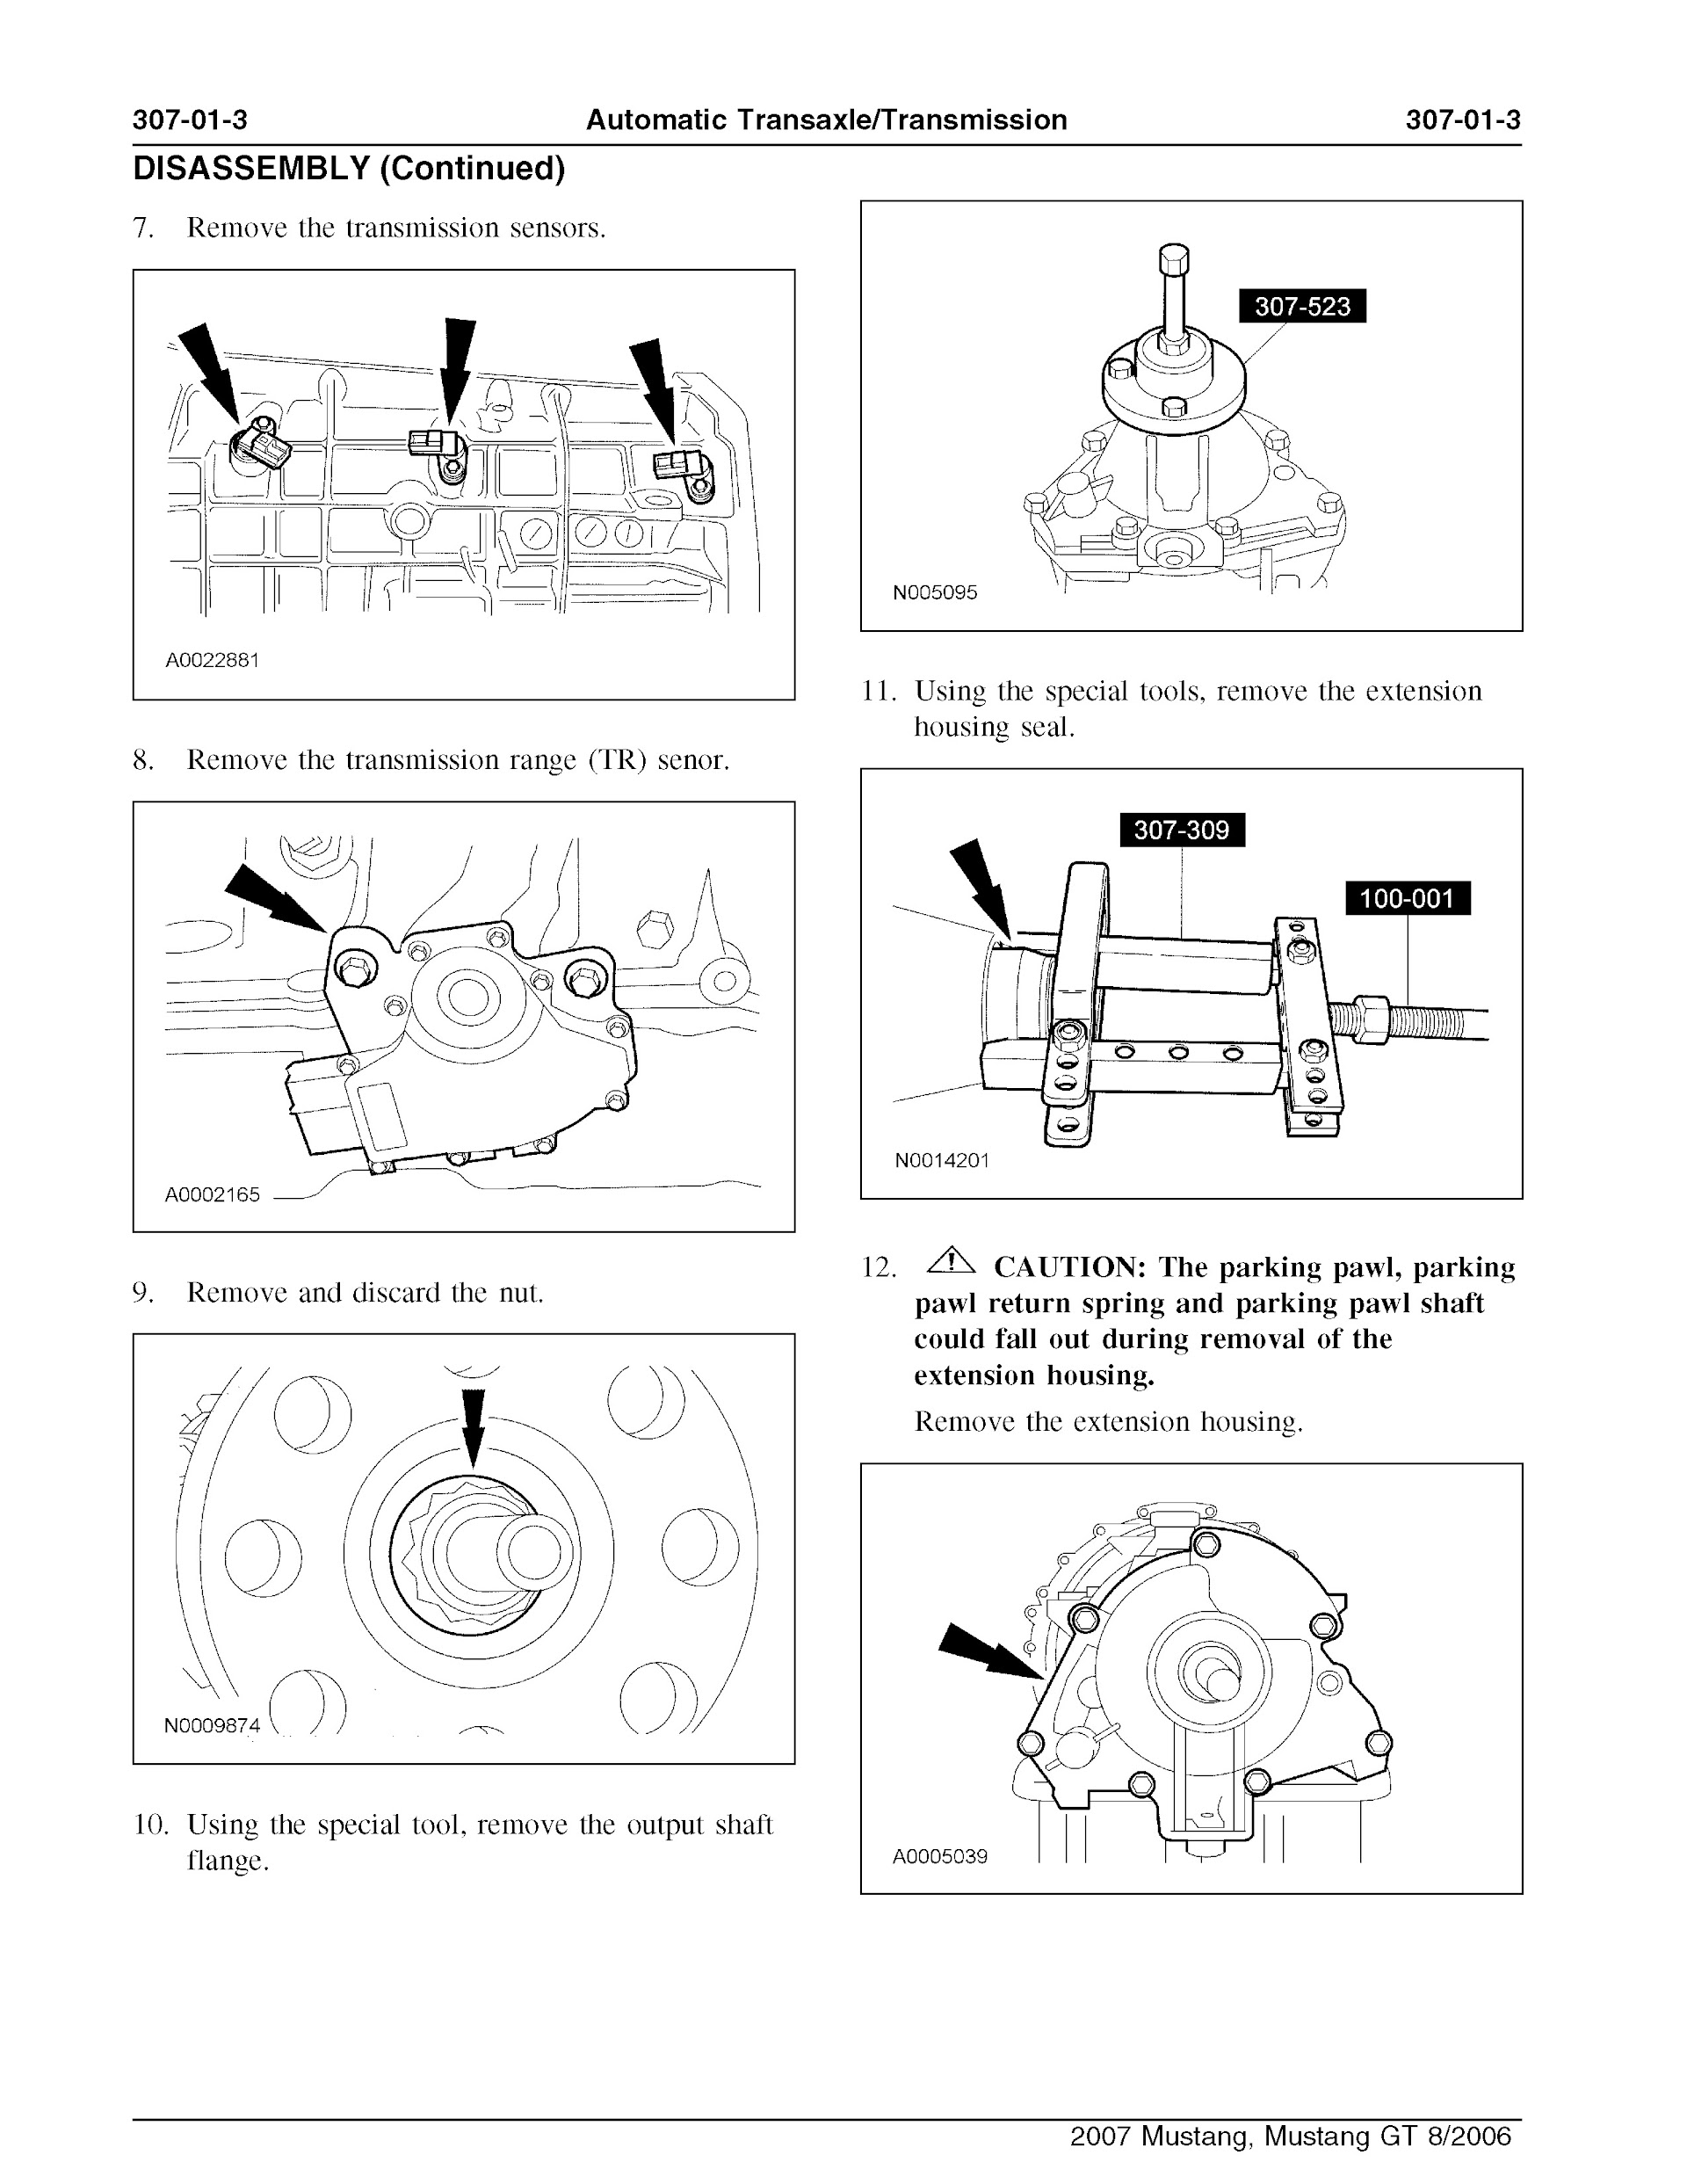 2007 Ford Mustang Repair Manual, Tranmission Assembly and Disassembly